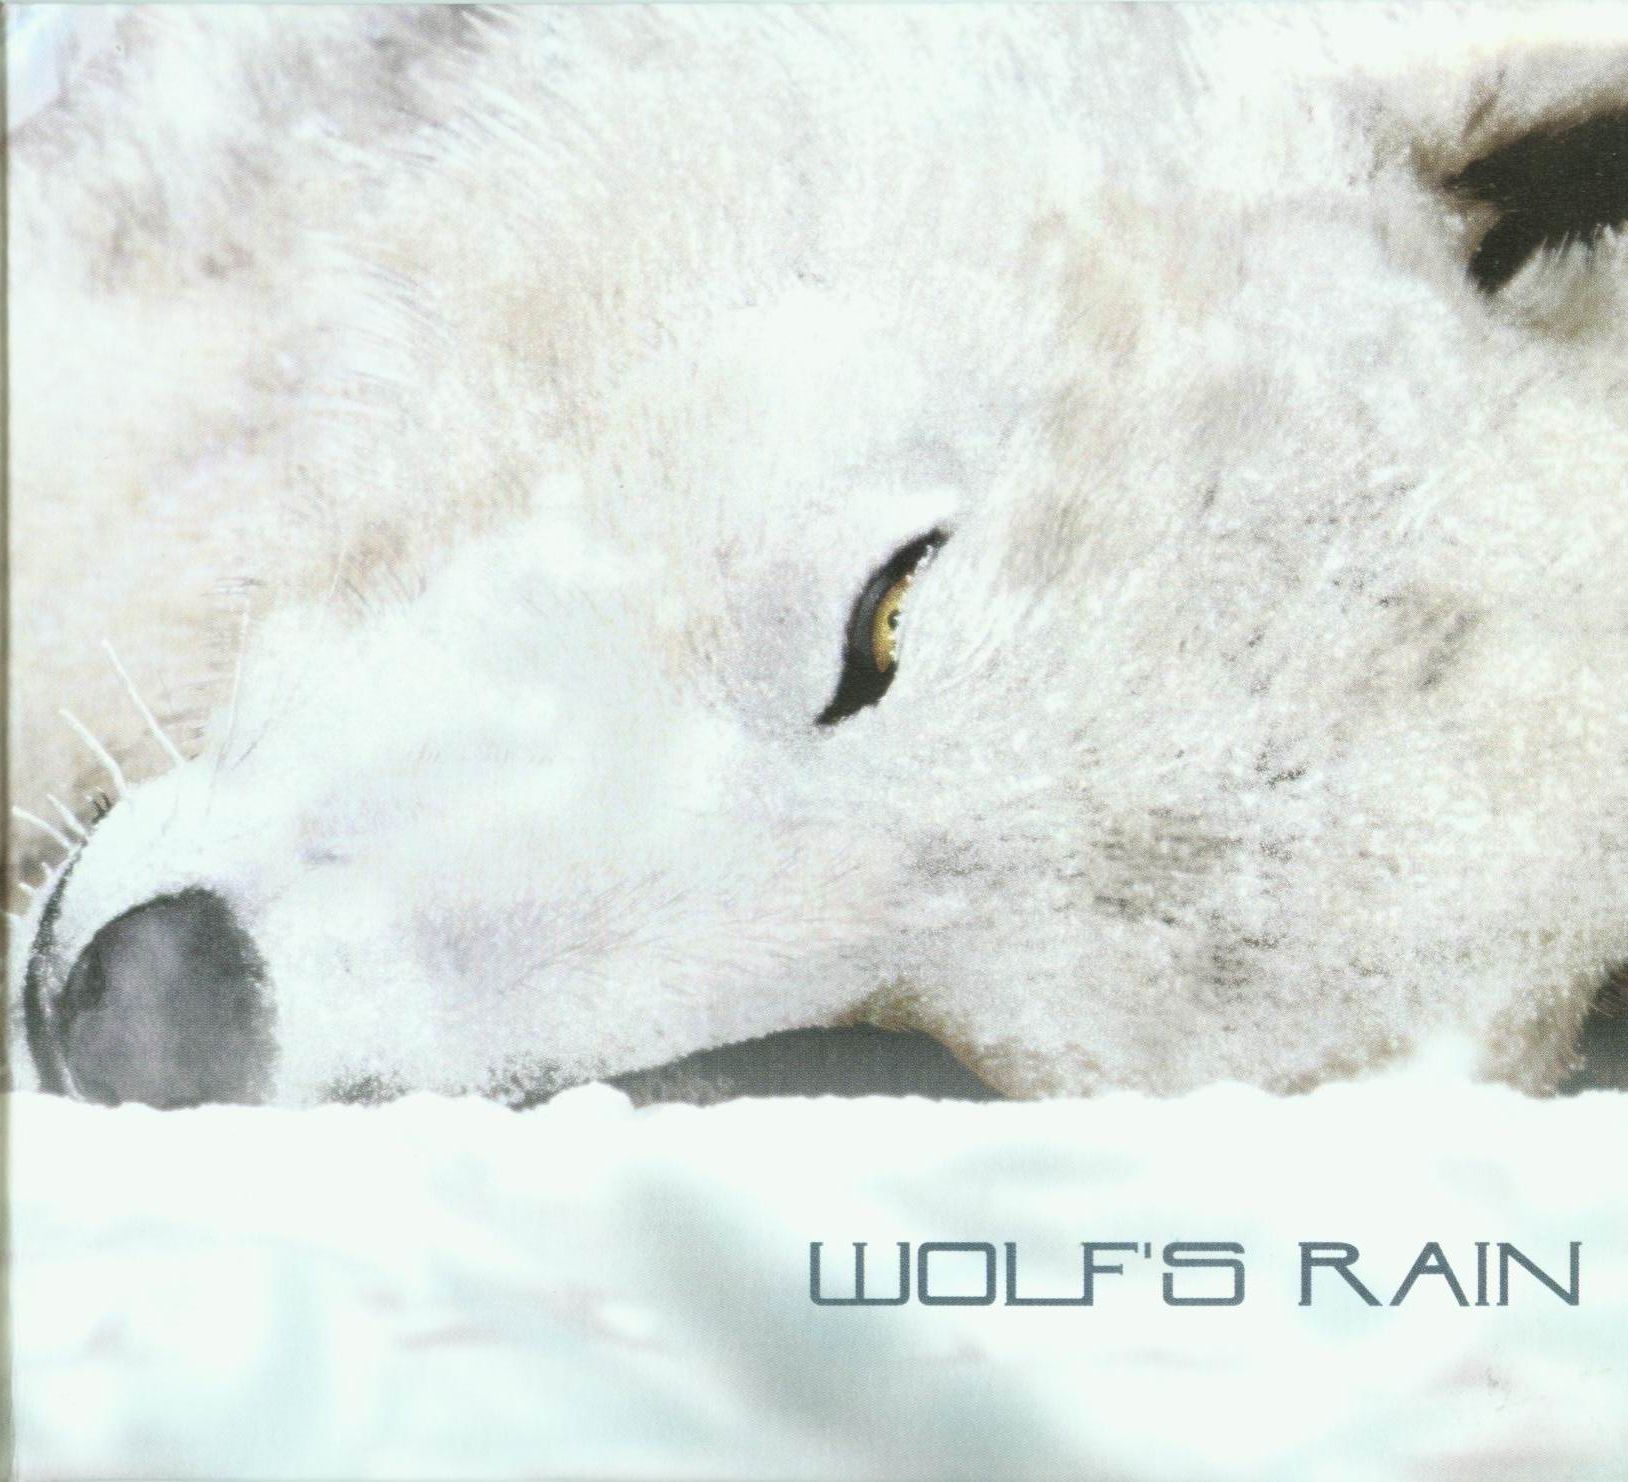 Wolf's Rain OST - Front.jpgSee full size image
 Added by DuchessDream Posted in KibaWOLF'S RAIN Original Soundtrack (soundtrack)Original Soundtrac